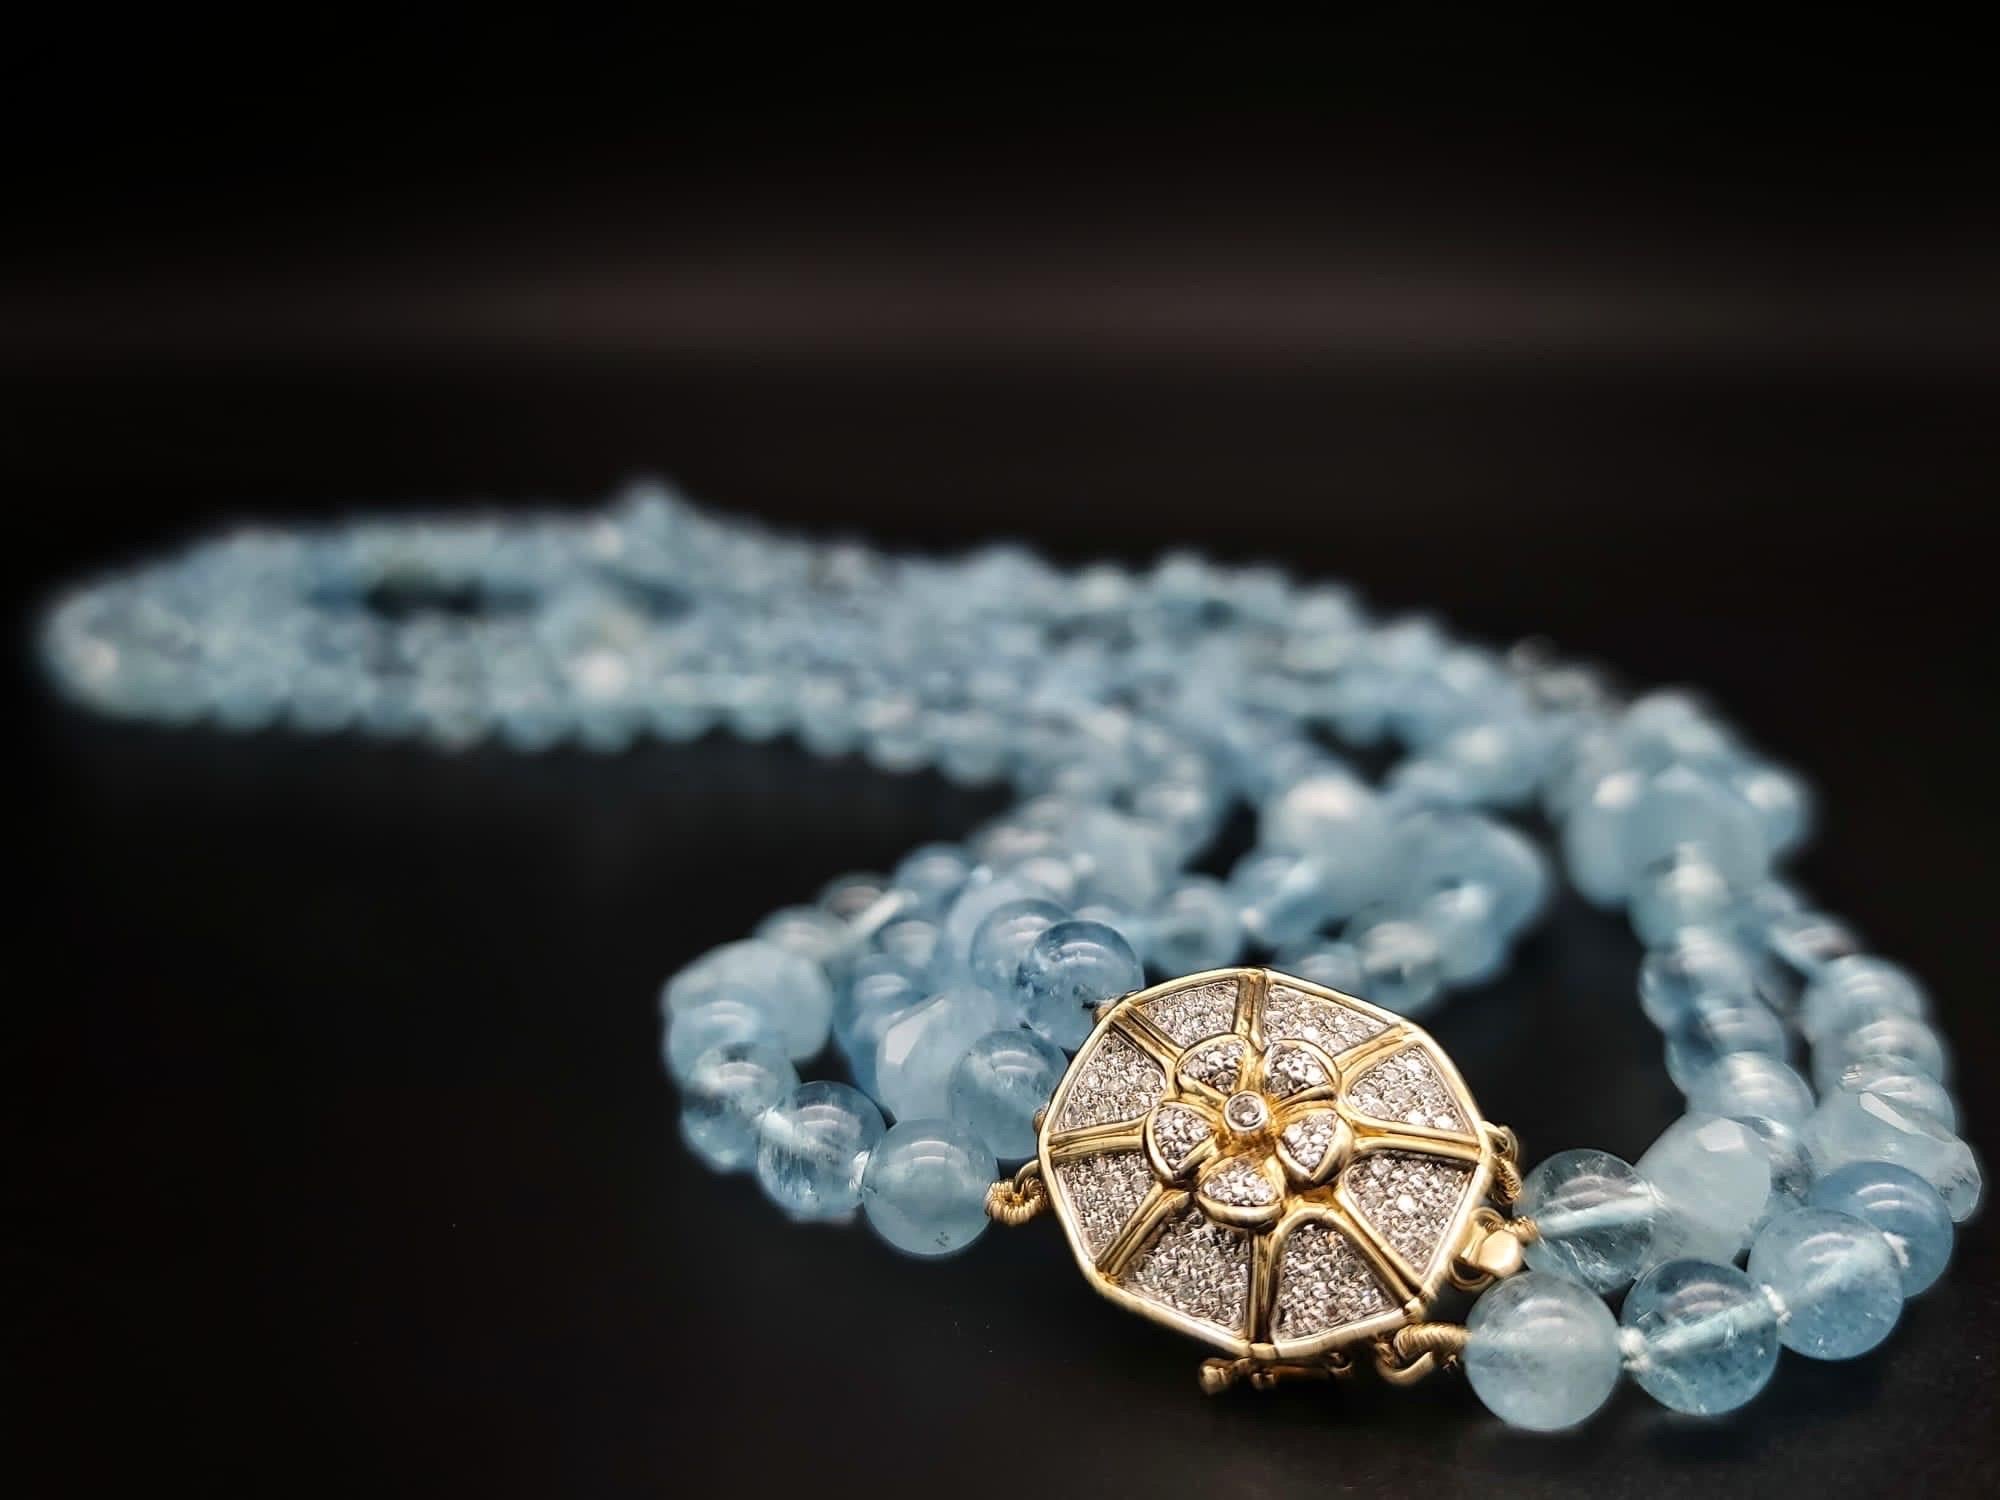 Mixed Cut A.Jeschel AAA Aquamarine necklace with a 14k Gold Diamond clasp.